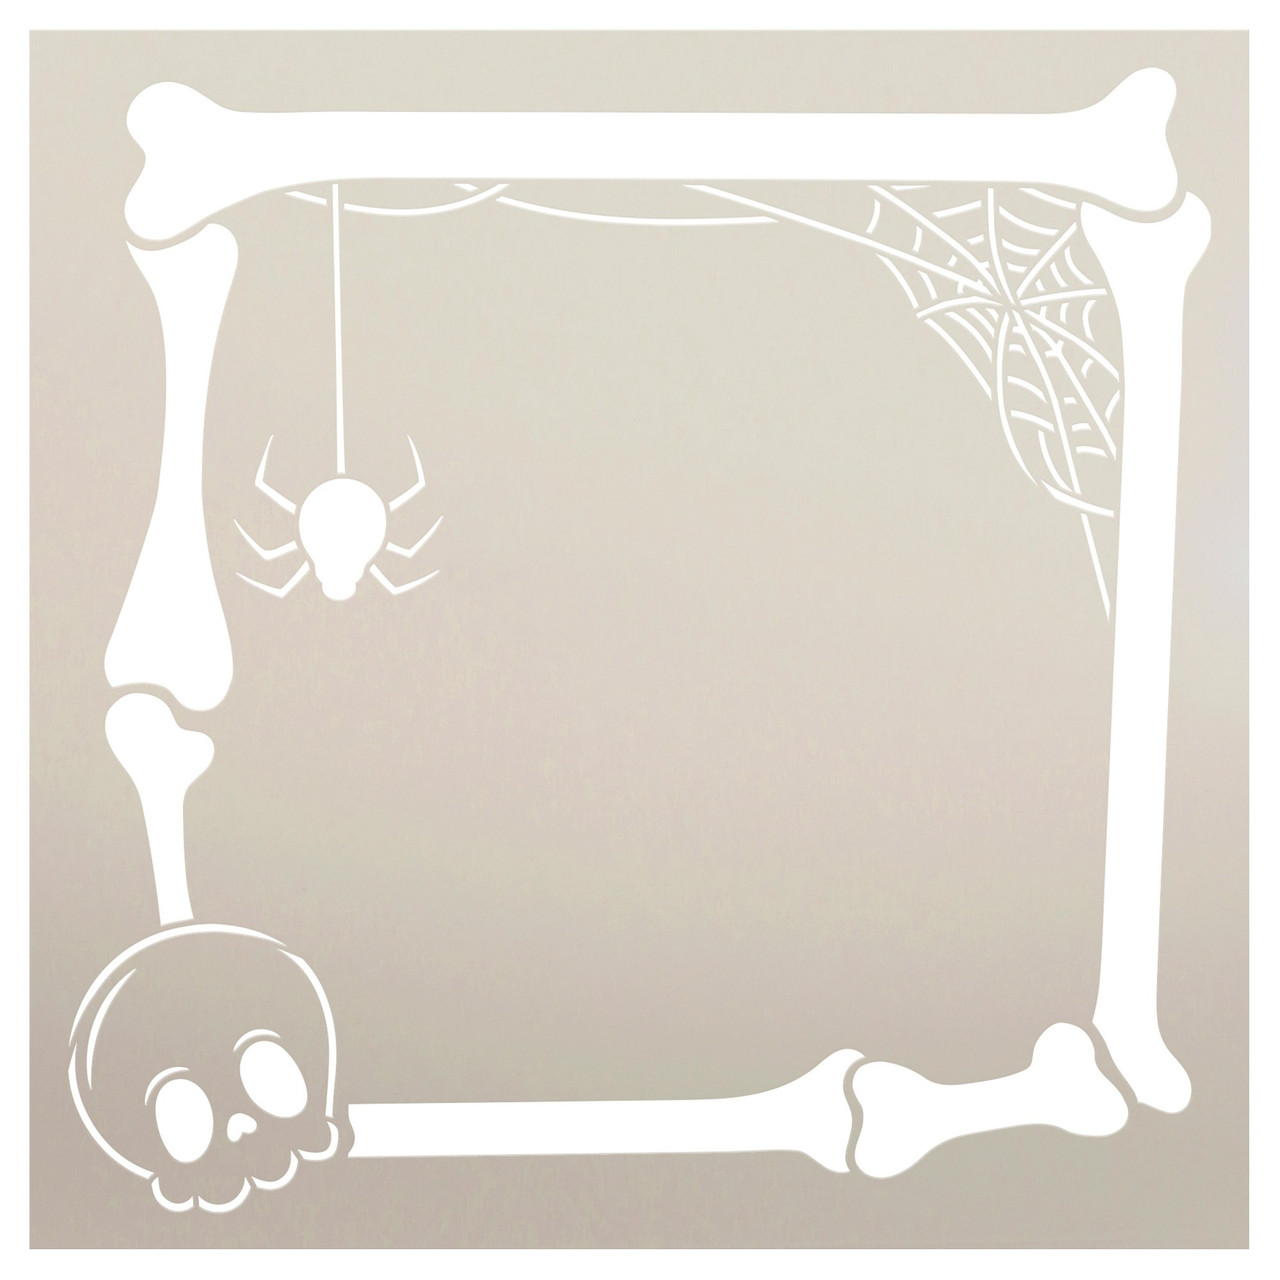 Skull & Bones Square Frame Stencil by StudioR12 - Select Size - USA Made - Craft DIY Spooky Halloween Home Decor | Paint Fall Seasonal Wood Sign | Reusable Template